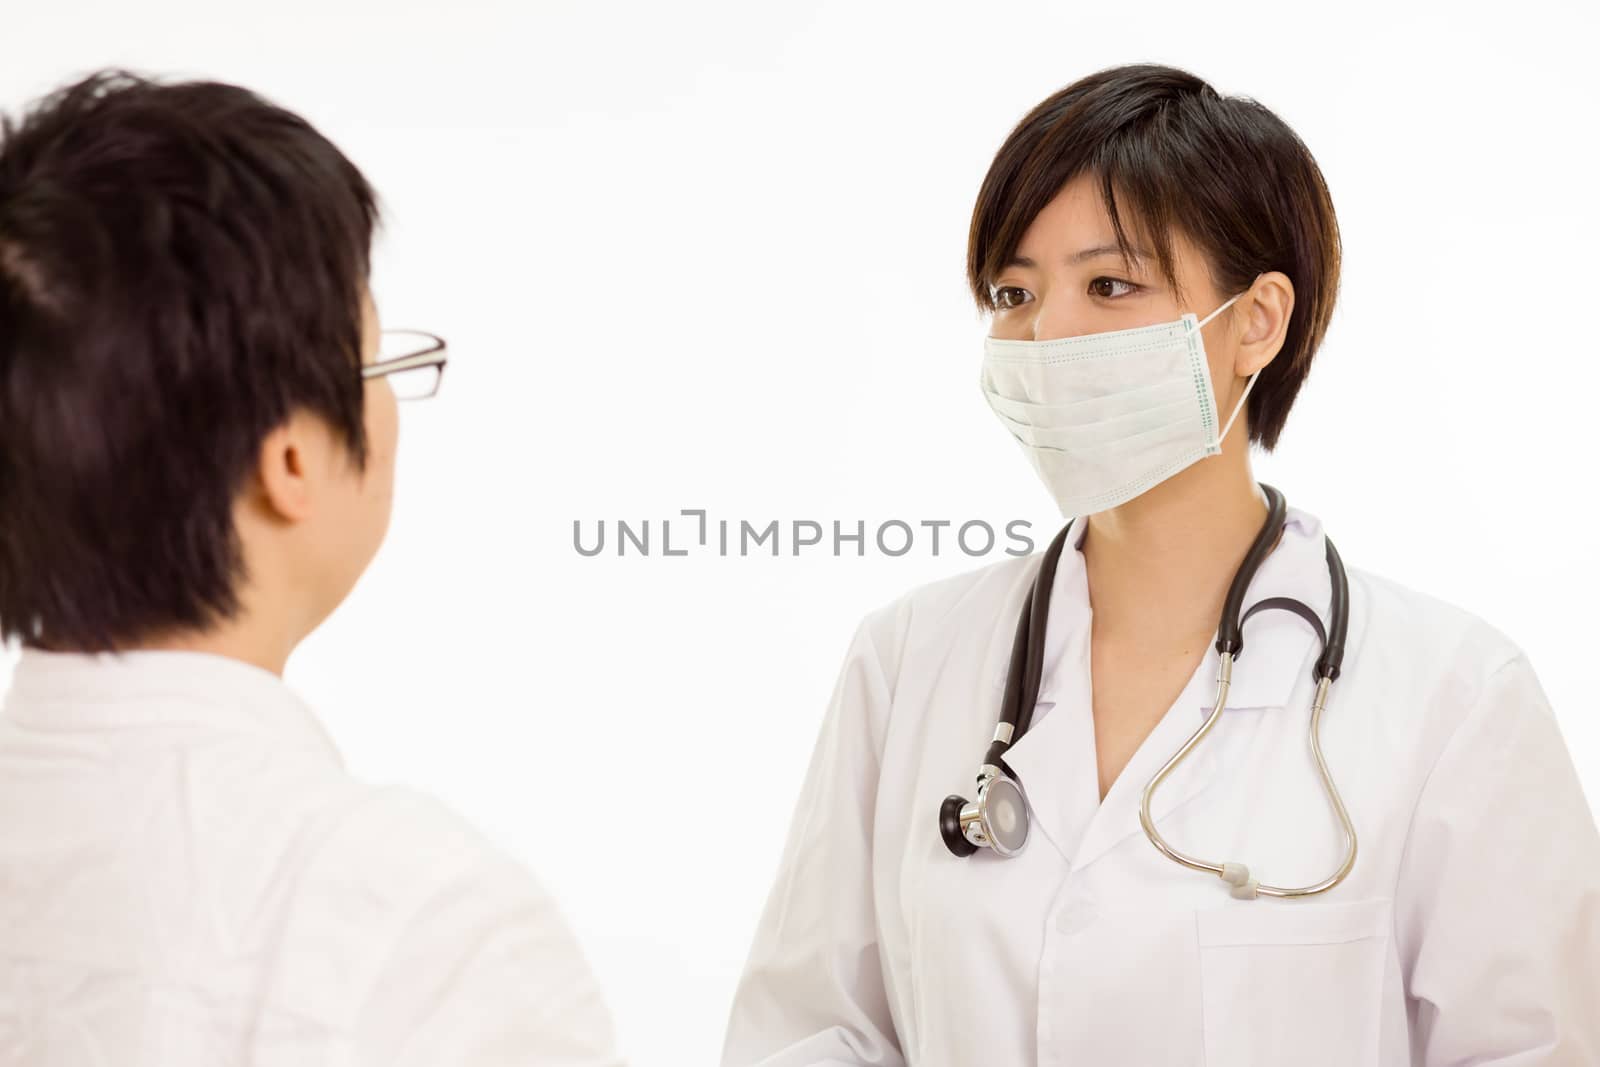 Chinese female doctor with patient